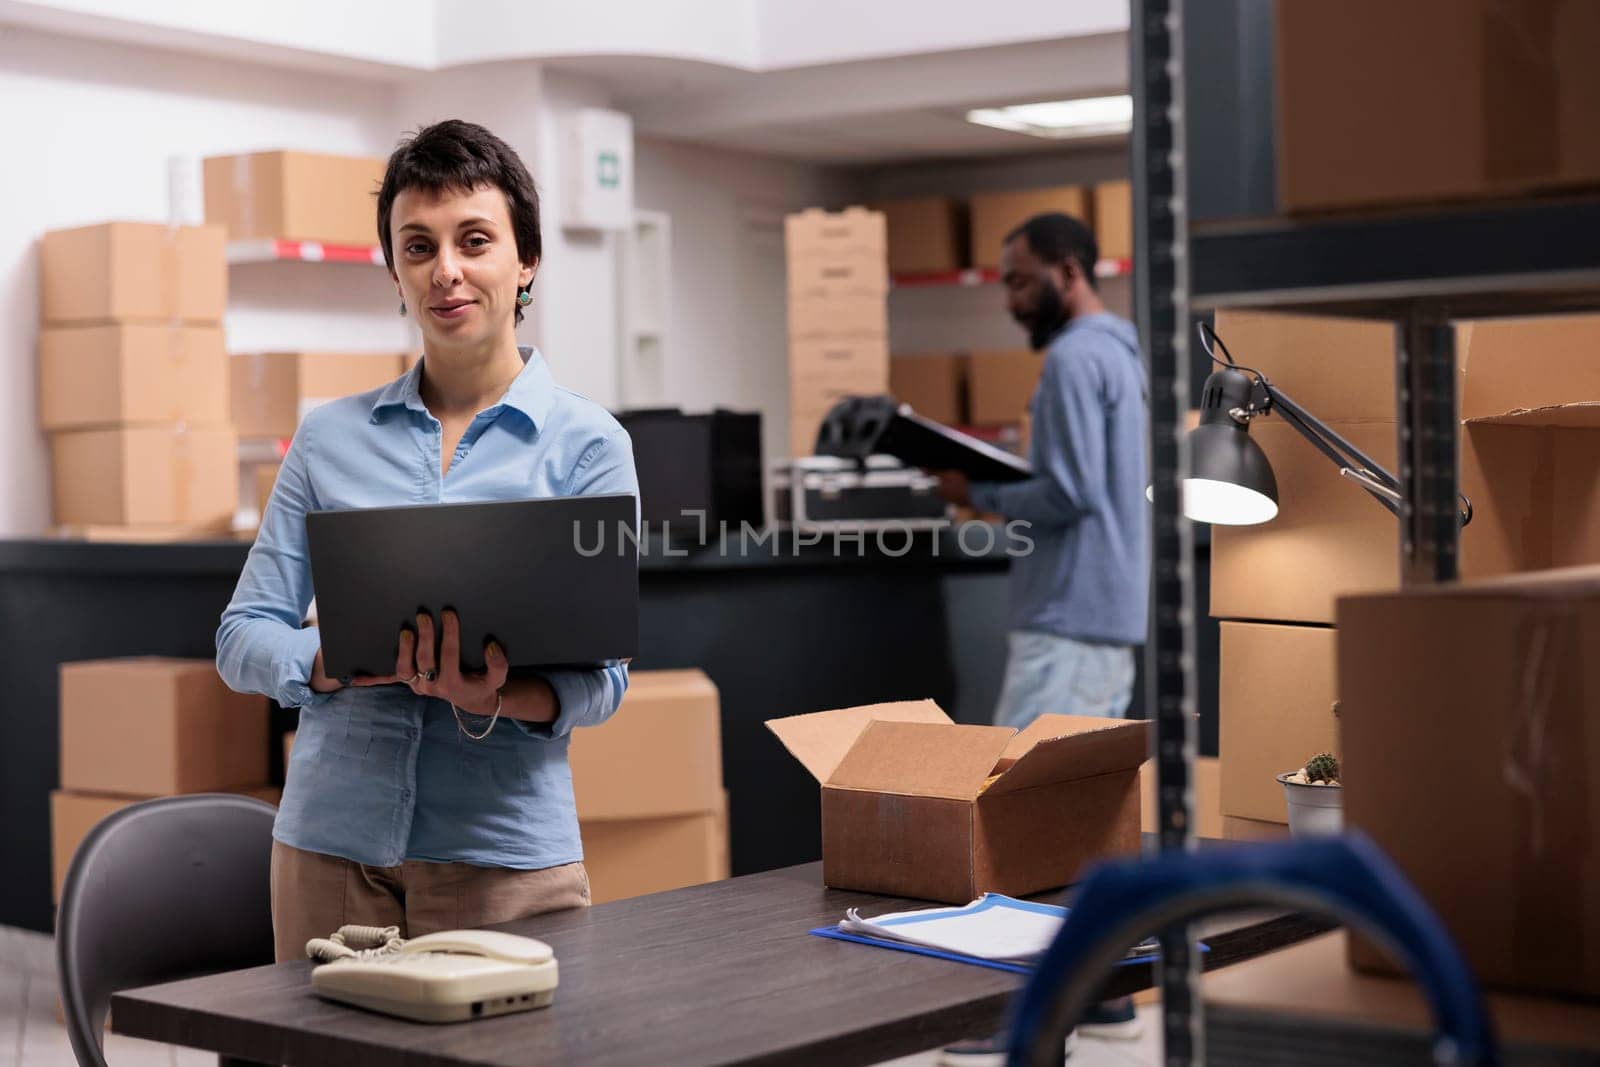 Storehouse manager holding laptop computer checking shipping detalies while working at clients orders, putting packages in carton box preparing for delivery. Distribution center fulfillment company